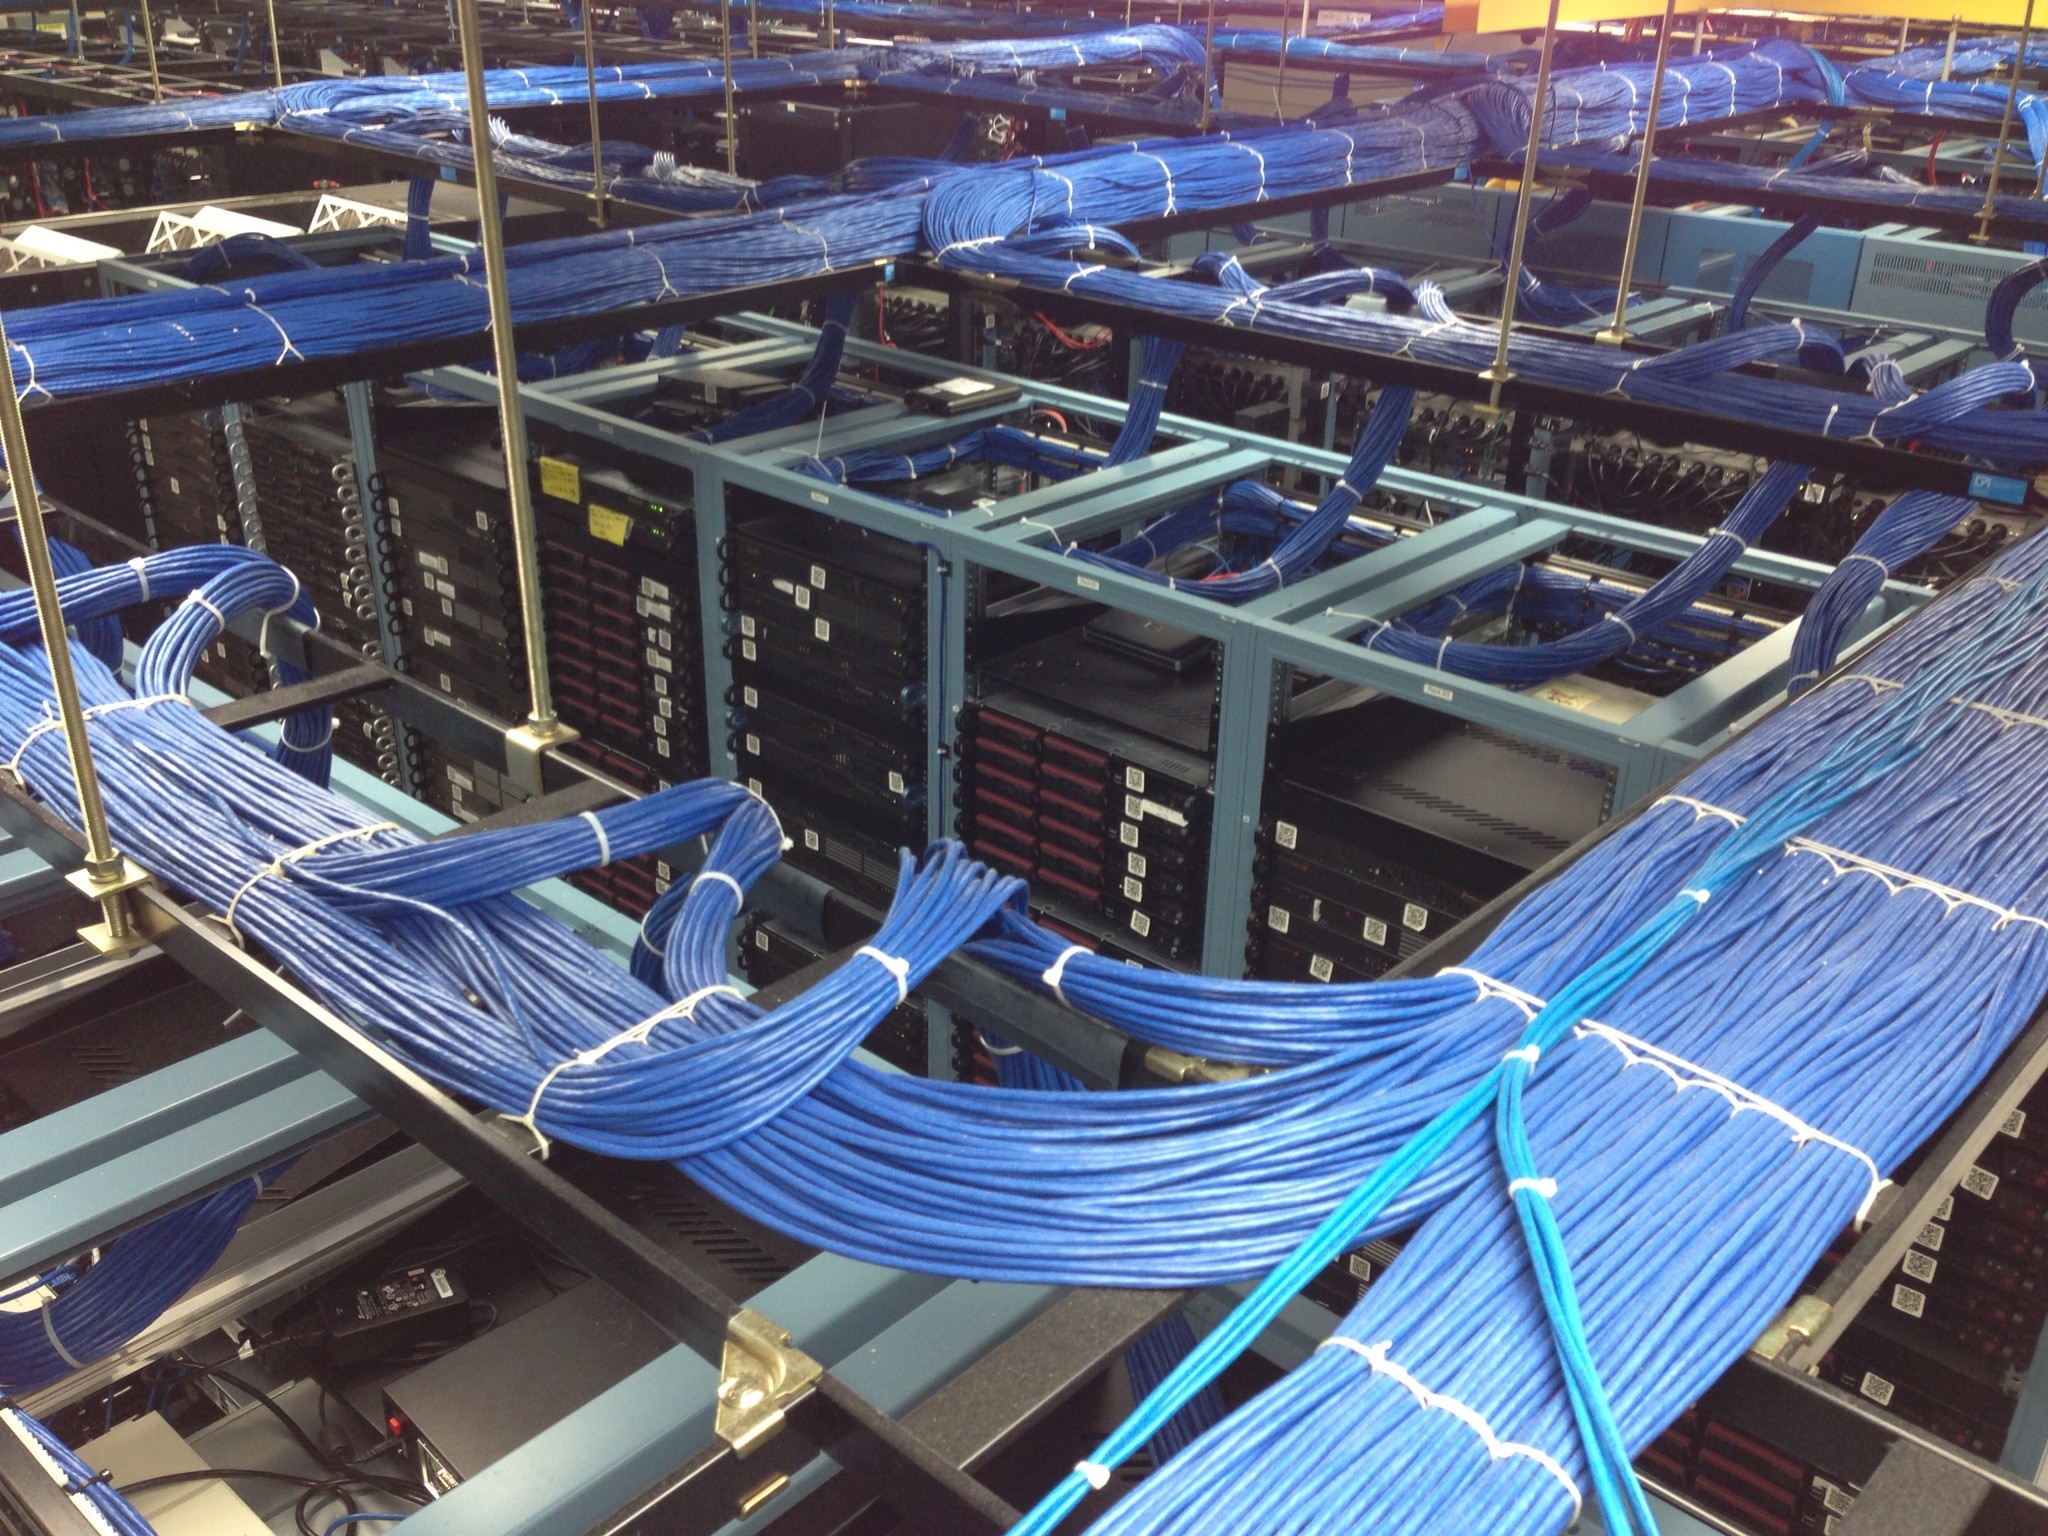 2048x1536 The search begins and we embark upon our parade of data center tours. We  needed a reasonably priced Tampa data center that provided a quality  network and ...